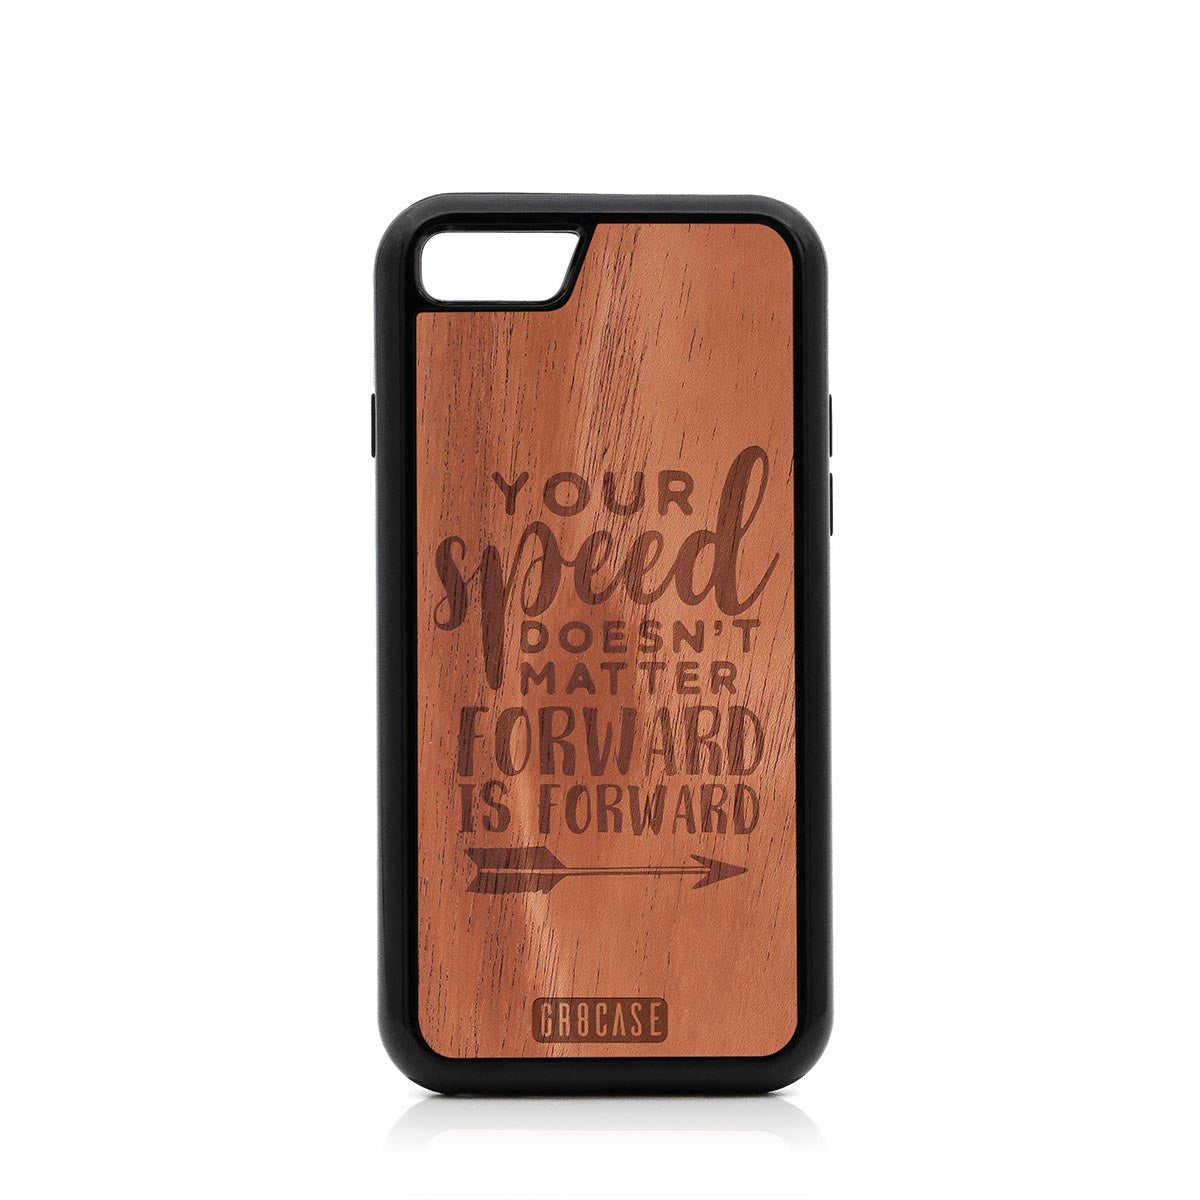 Your Speed Doesn't Matter Forward Is Forward Design Wood Case For iPhone 7/8